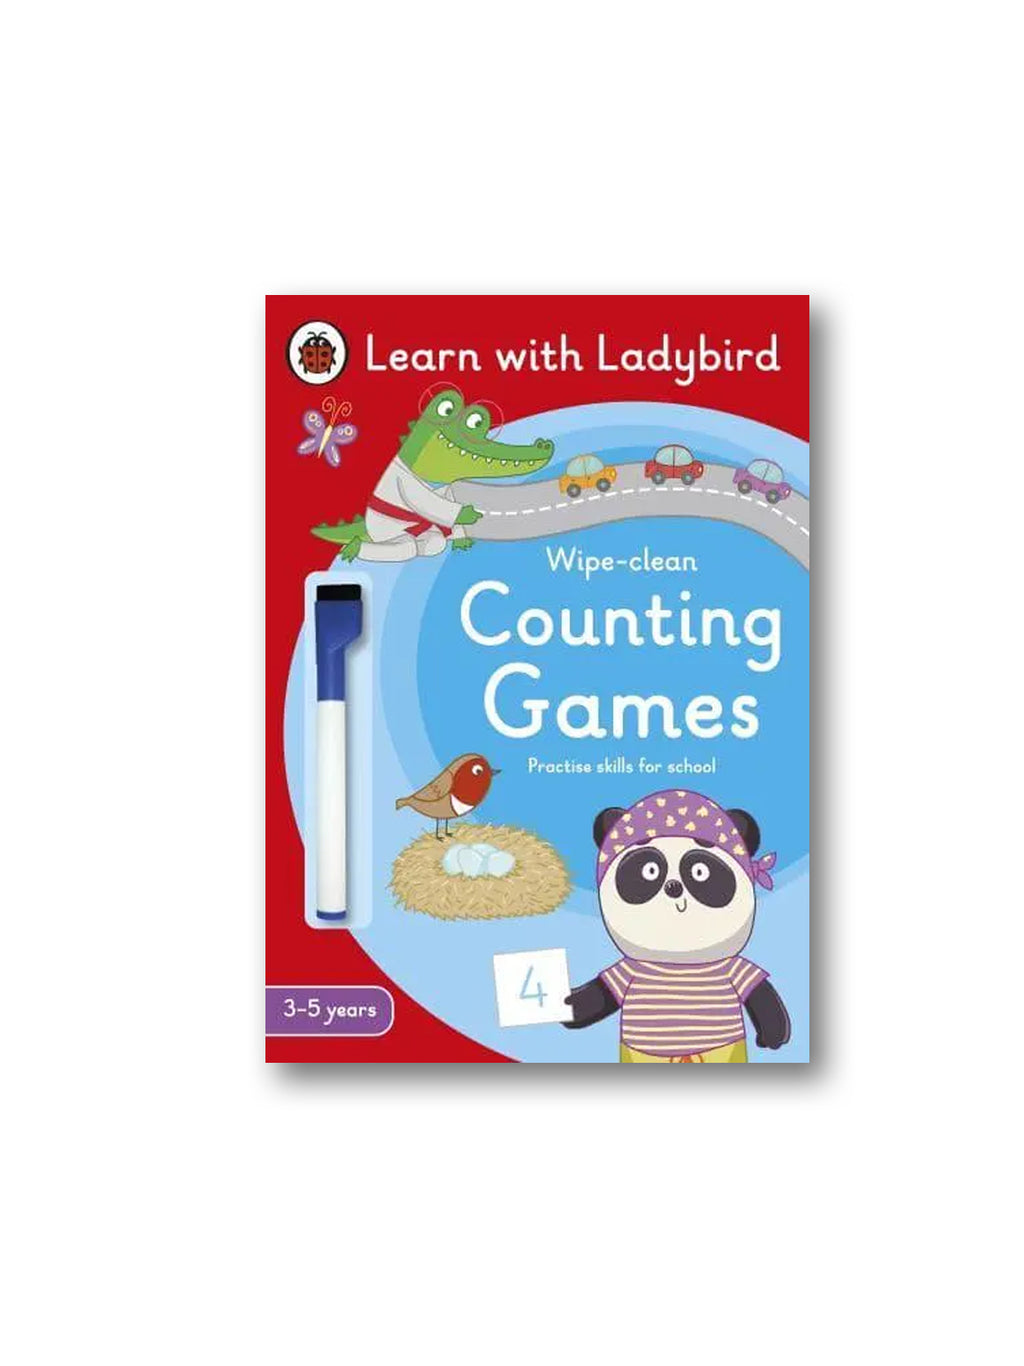 Counting Games: A Learn with Ladybird Wipe-clean Activity Book (3-5 years)